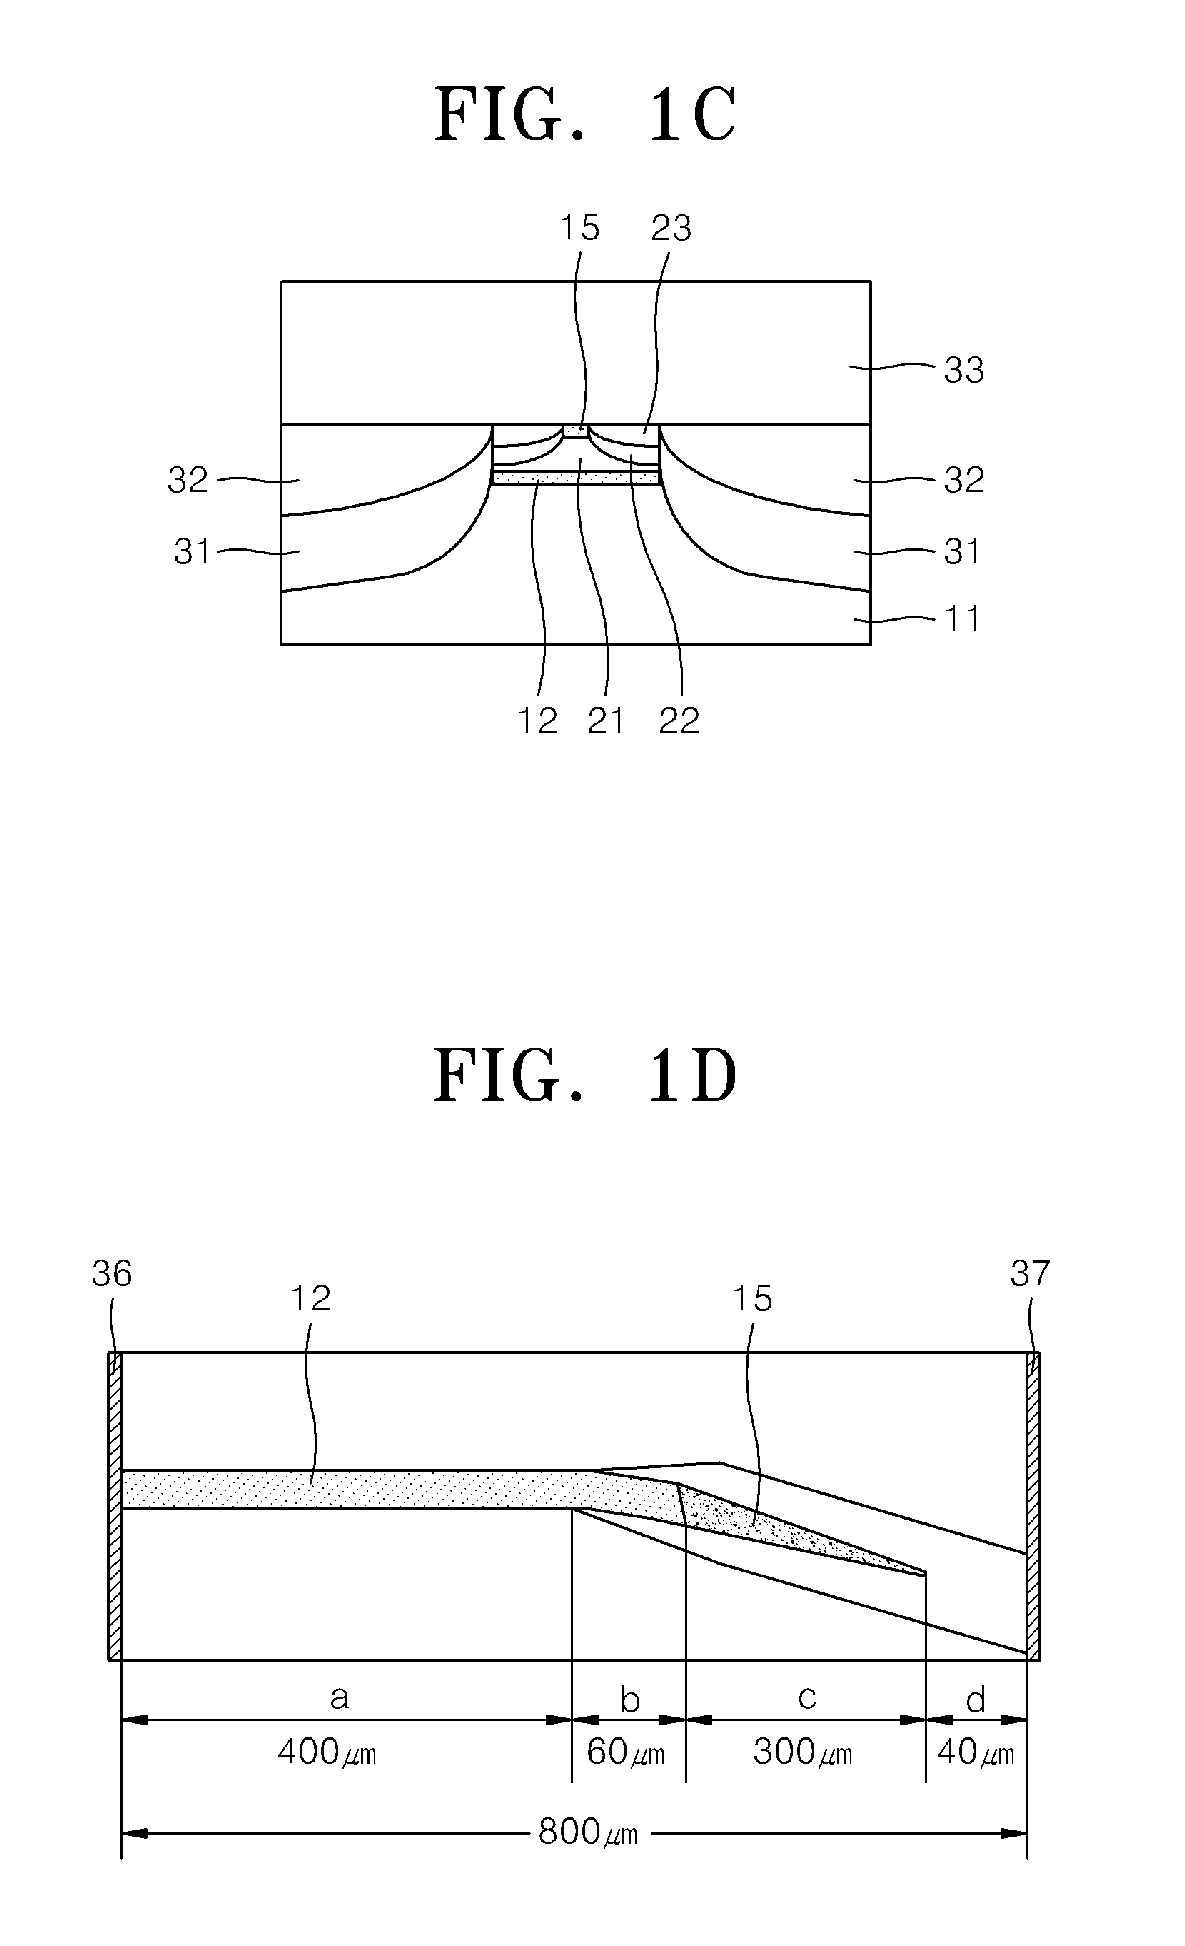 Reflective semiconductor optical amplifier (r-soa) and superluminescent diode (SLD)